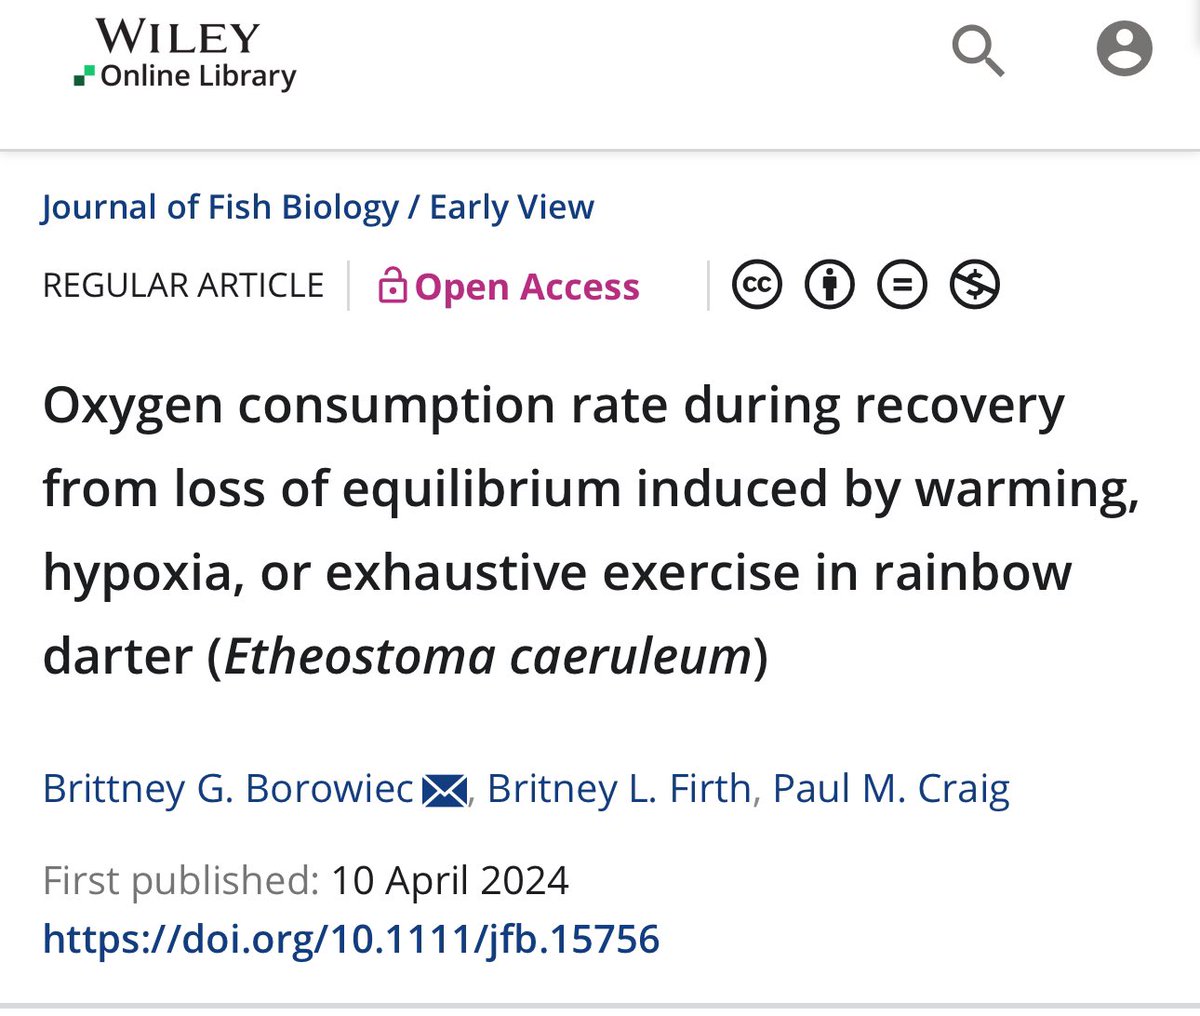 Want to know the difference between temperature, hypoxia, and exercise on metabolism in fish? Check out @this_is_brit & @Britney_Firth latest paper in rainbow darters! Great work coming out of the new WATER Facility @WaterlooSci onlinelibrary.wiley.com/doi/10.1111/jf…